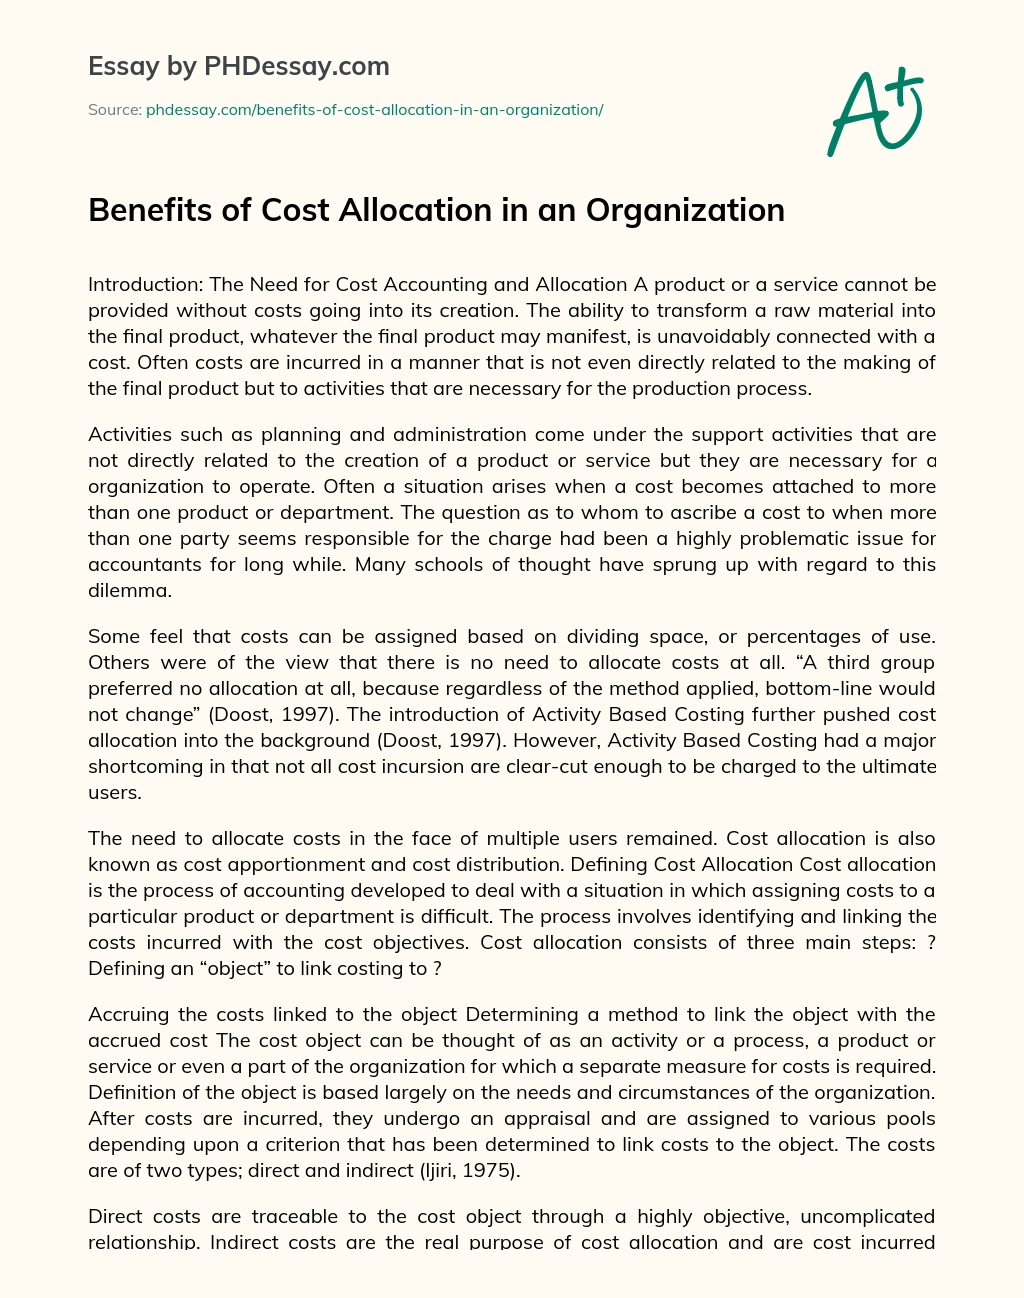 Benefits of Cost Allocation in an Organization essay